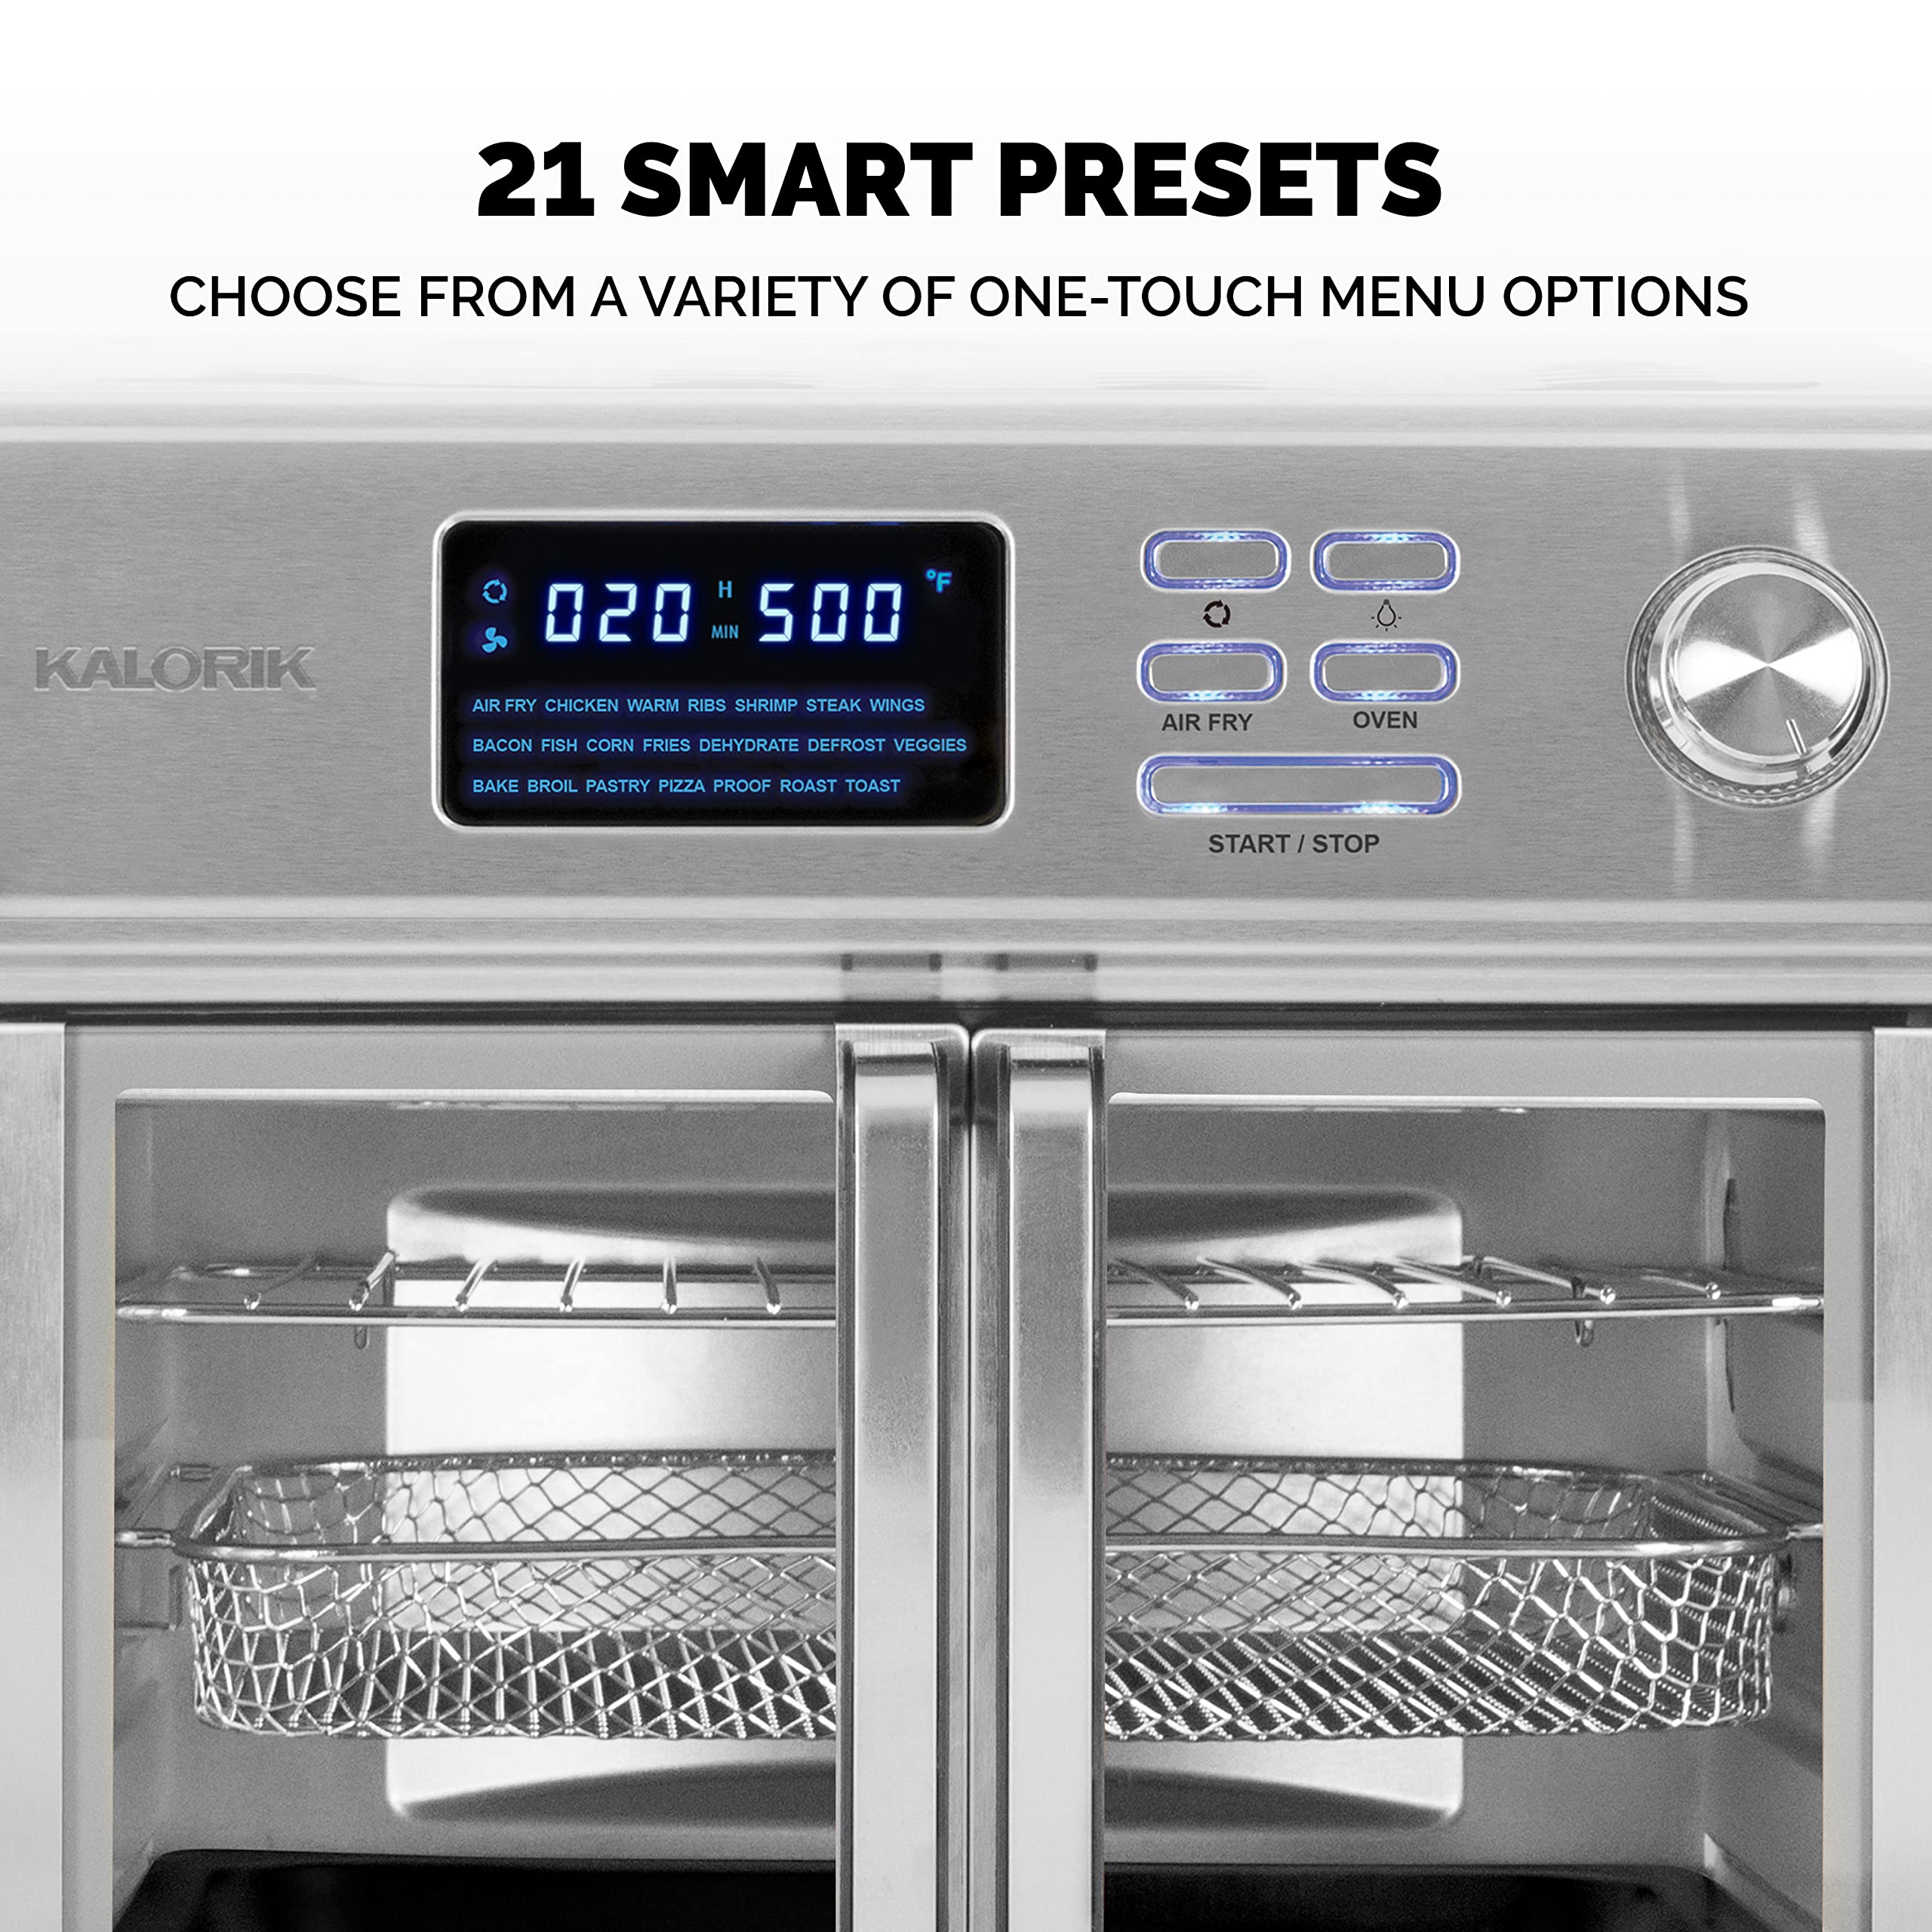 Kalorik® MAXX® Digital Air Fryer Oven, 26 Quart, 10-in-1 Countertop Toaster Oven & Air Fryer Combo-21 Presets up to 500 degrees, Includes 9 Accessories & Cookbook